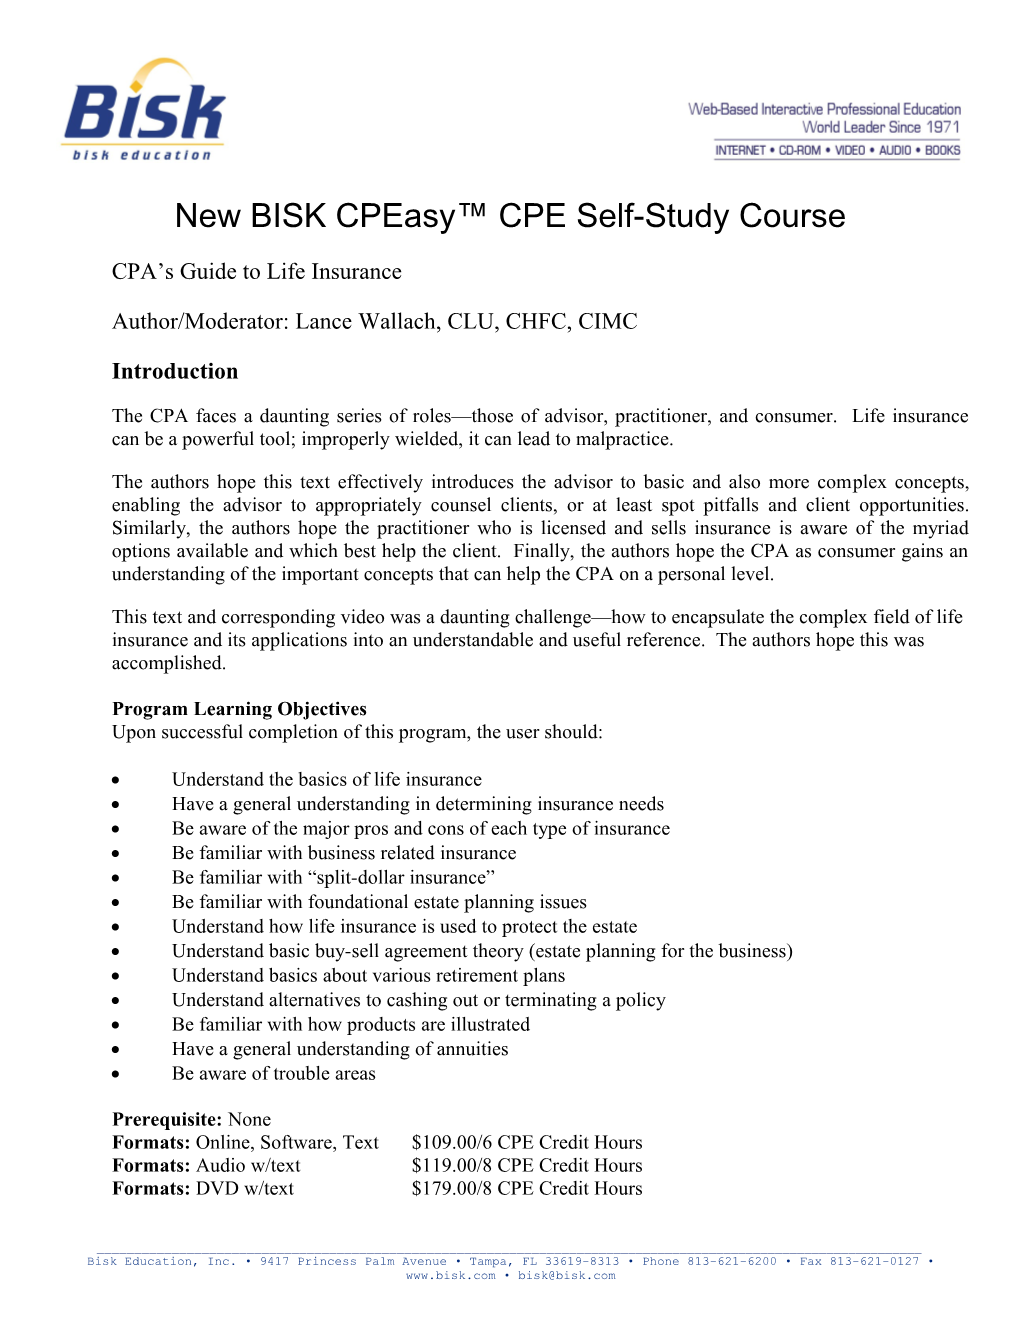 New BISK Cpeasy CPE Self-Study Course